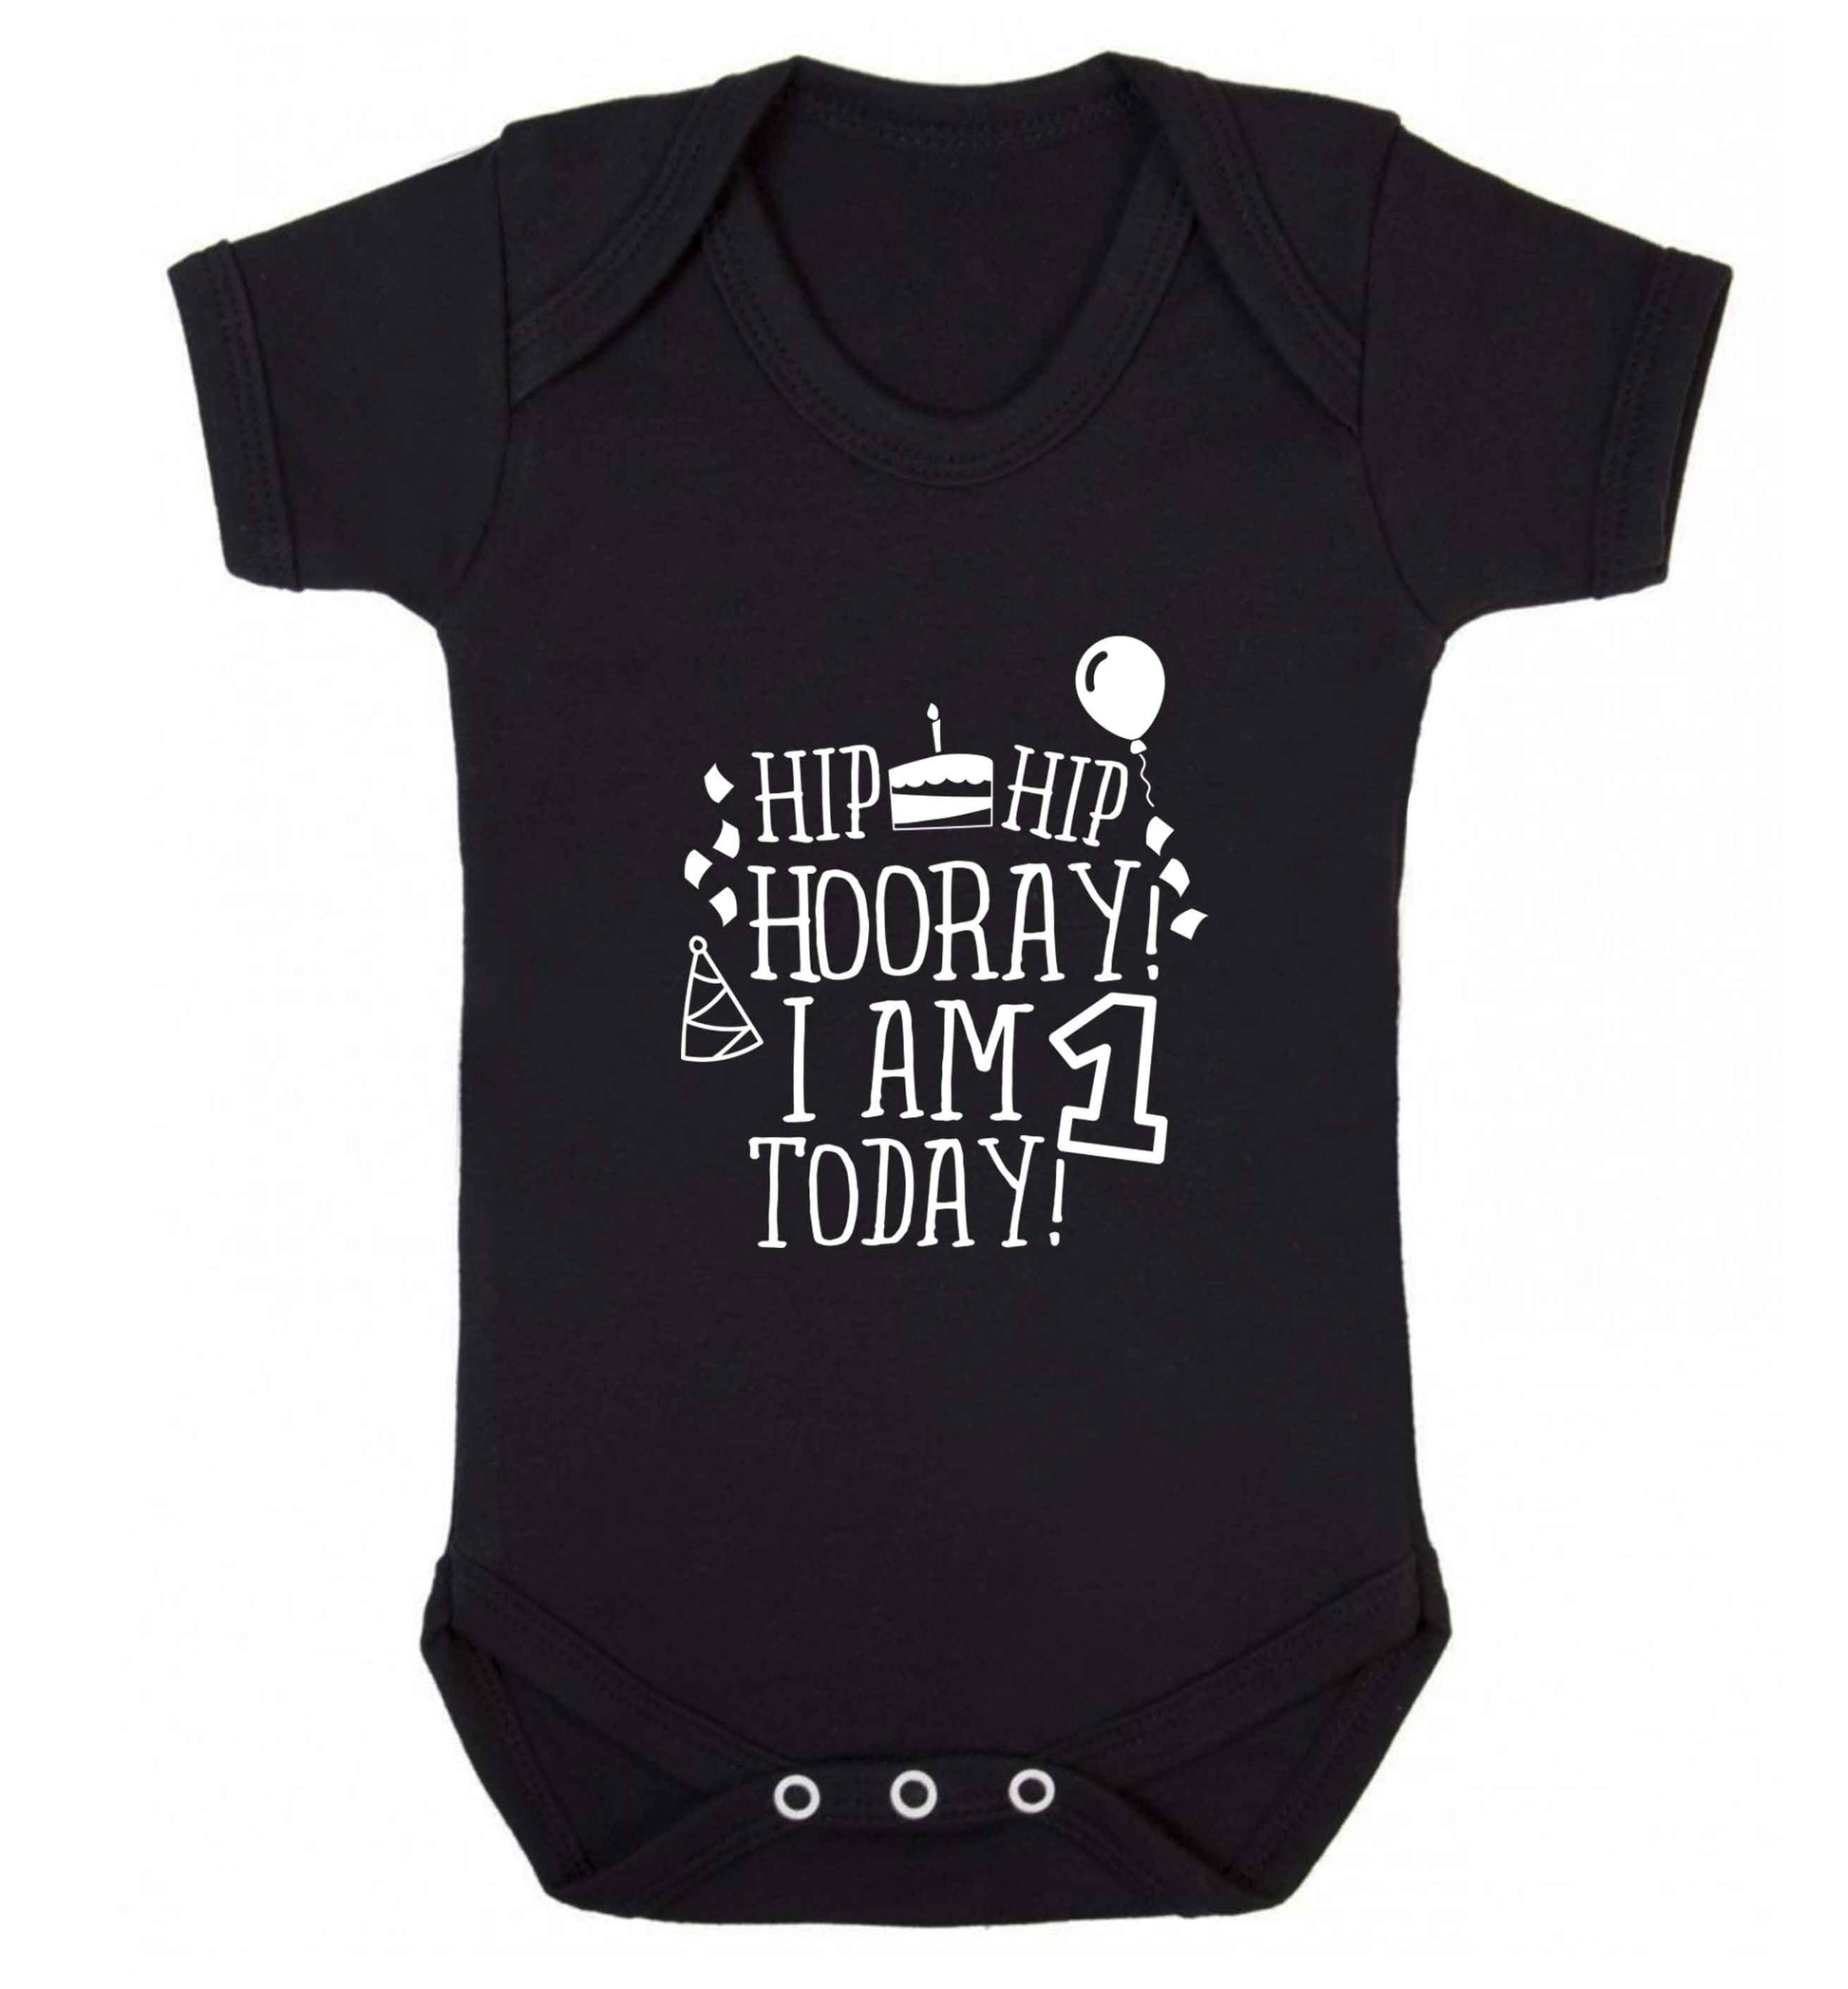 I am One Today baby vest black 18-24 months